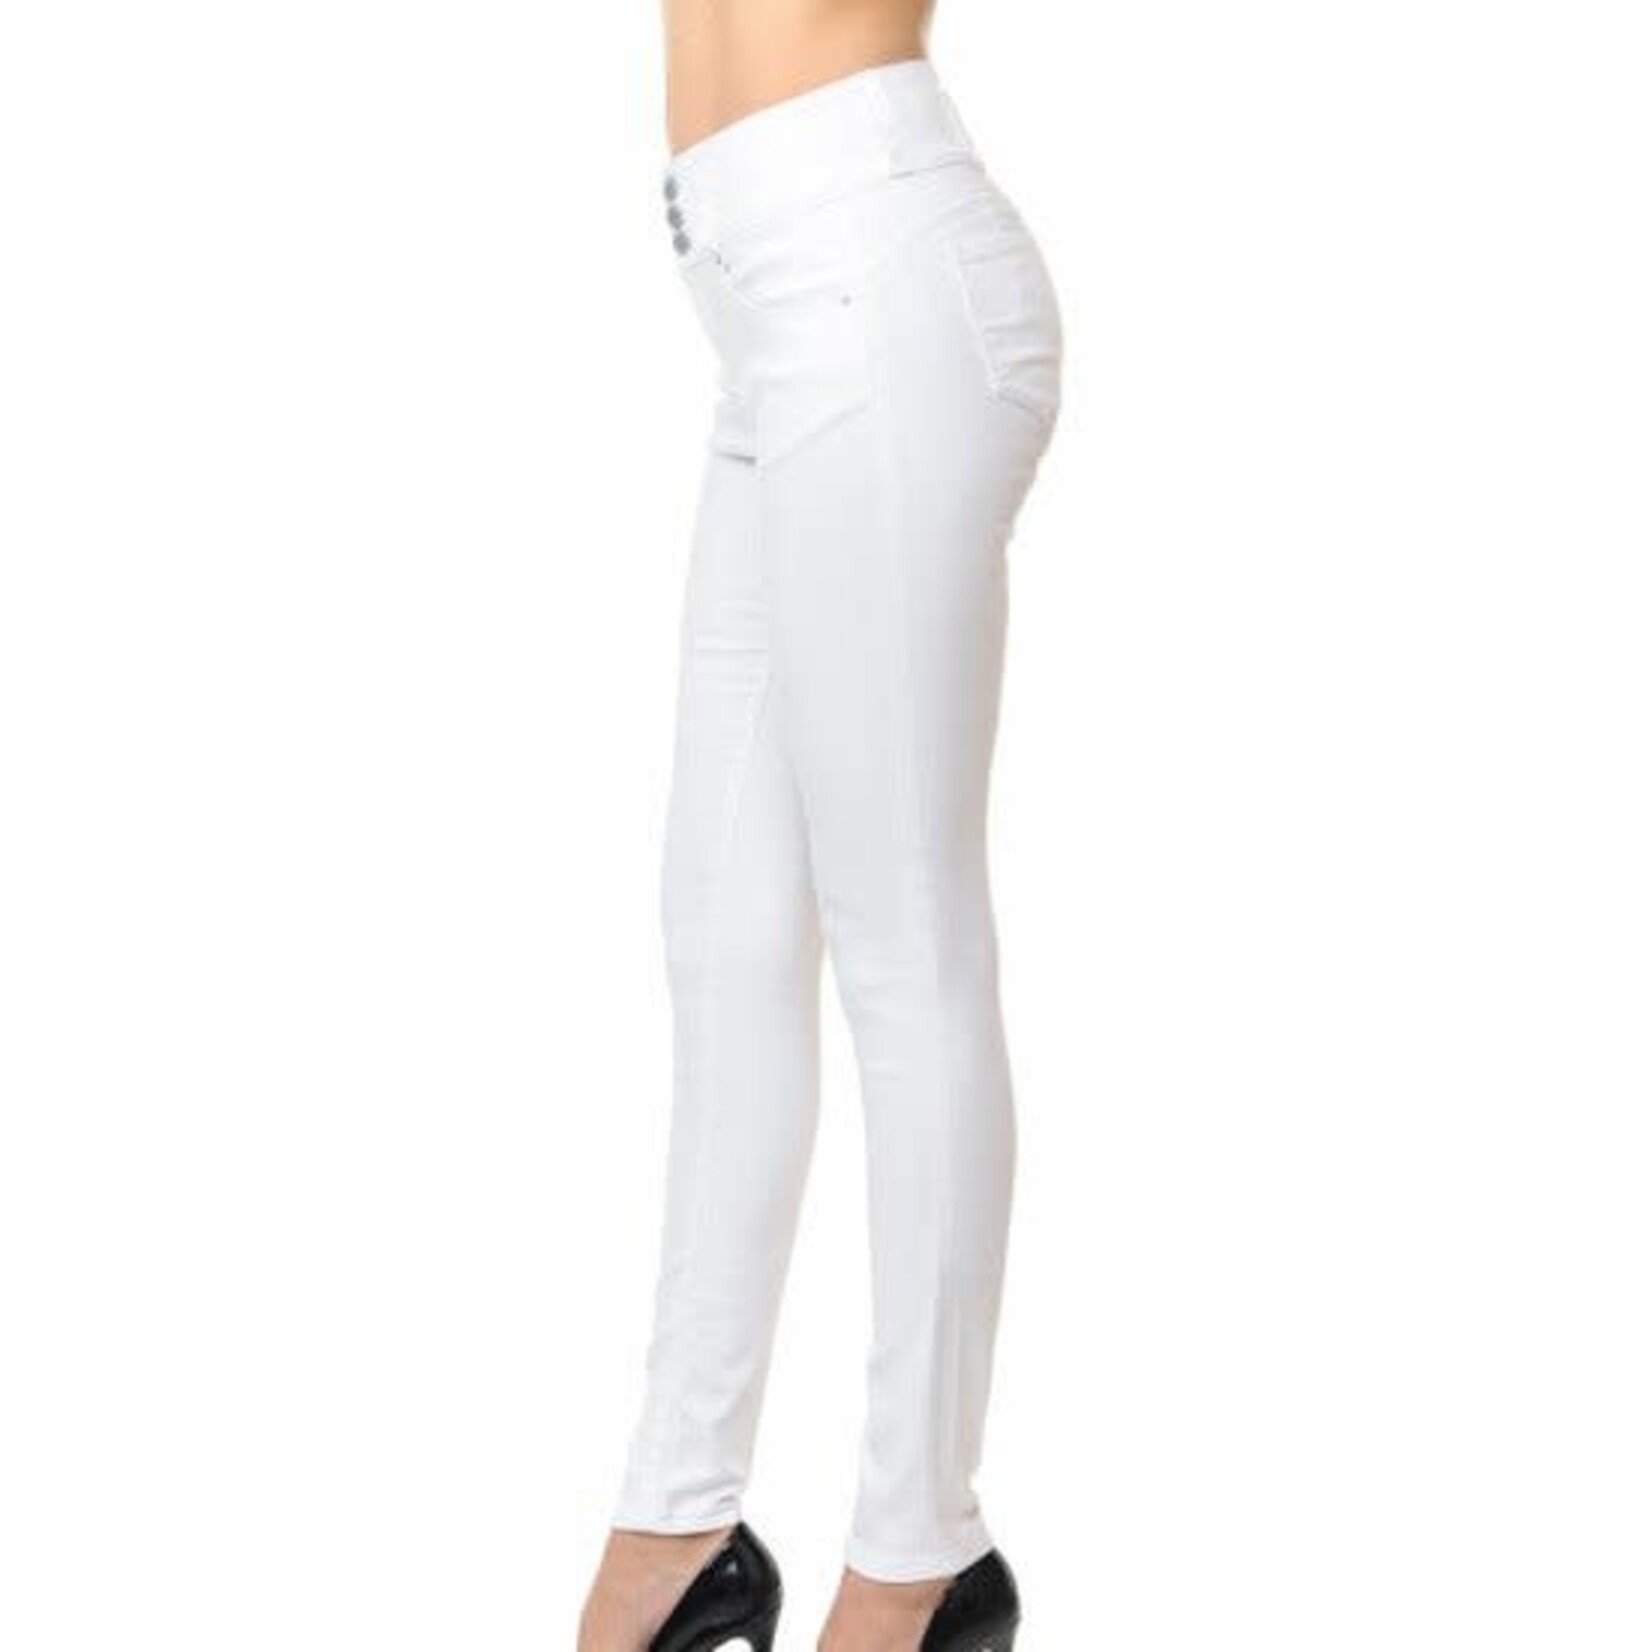 Wax Jeans Wax Jeans - High-Rise Push-Up Super Comfy Skinny Jean - 90400